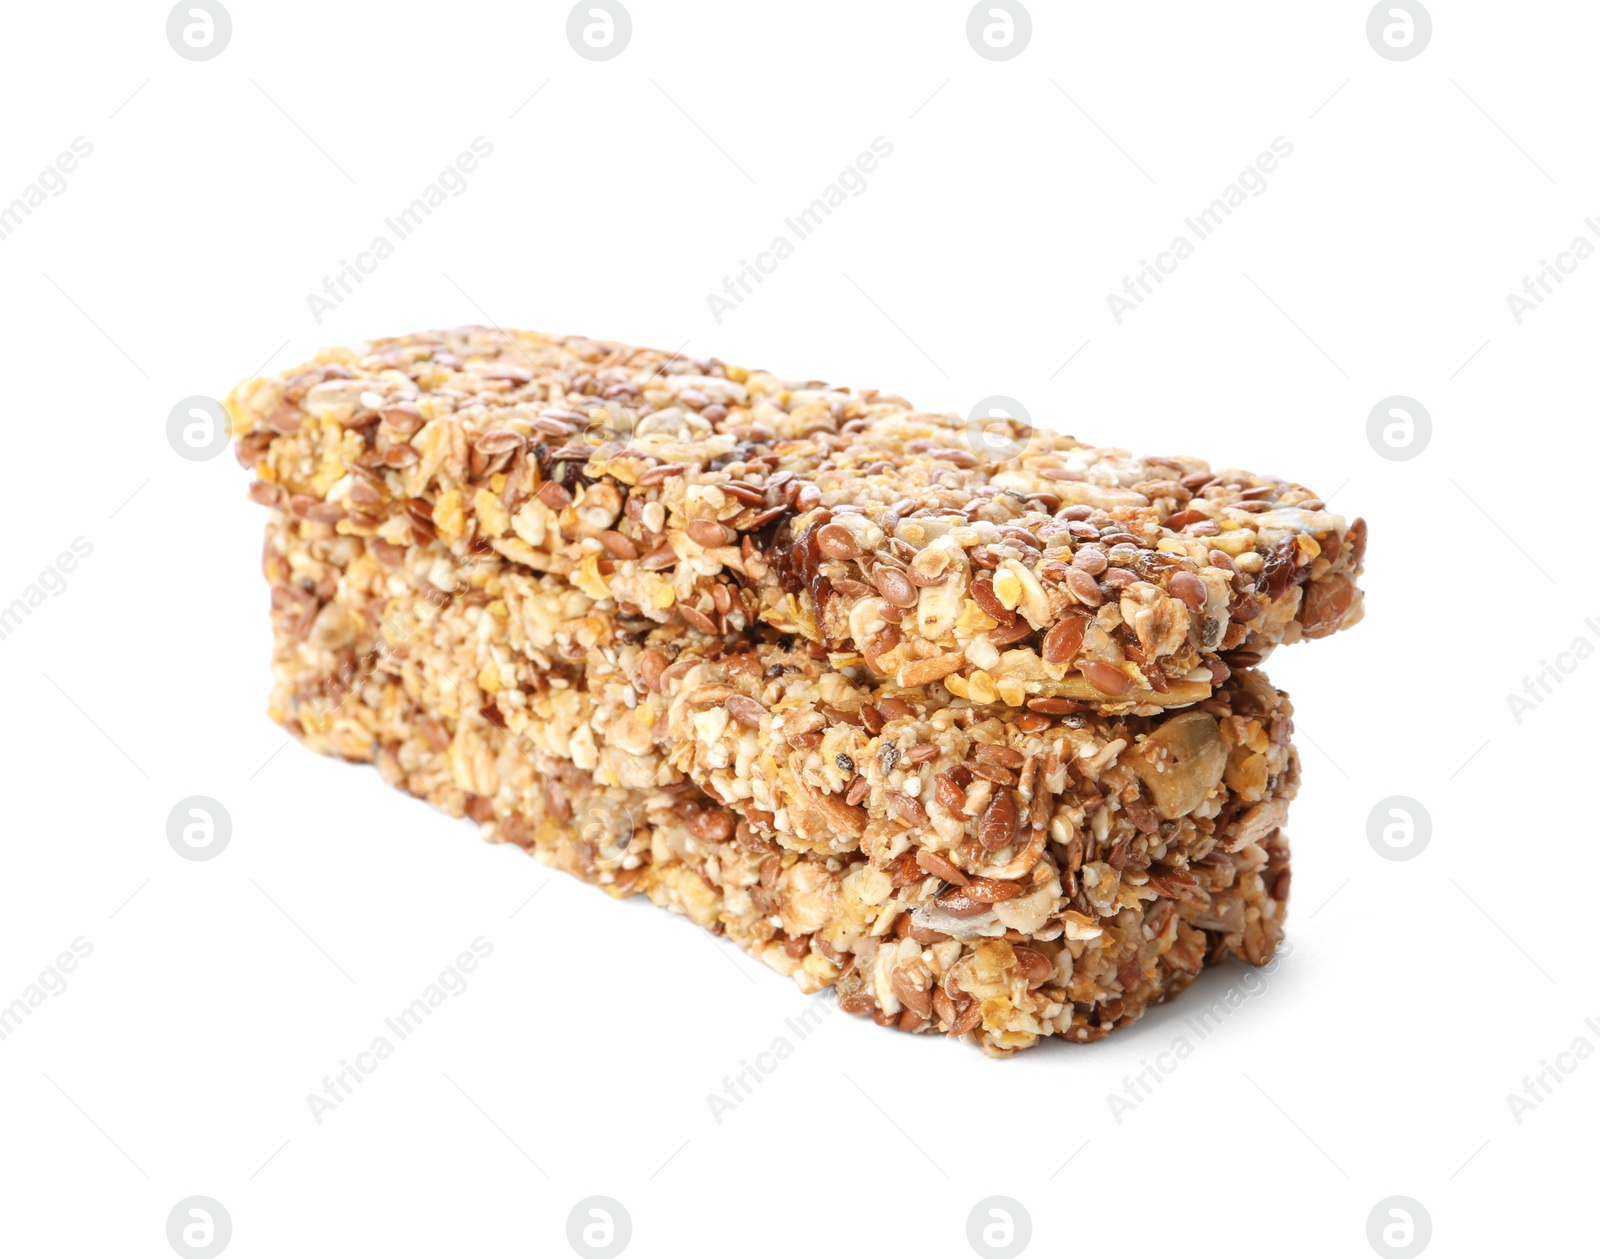 Image of Crunchy granola bars on white background. Healthy snack